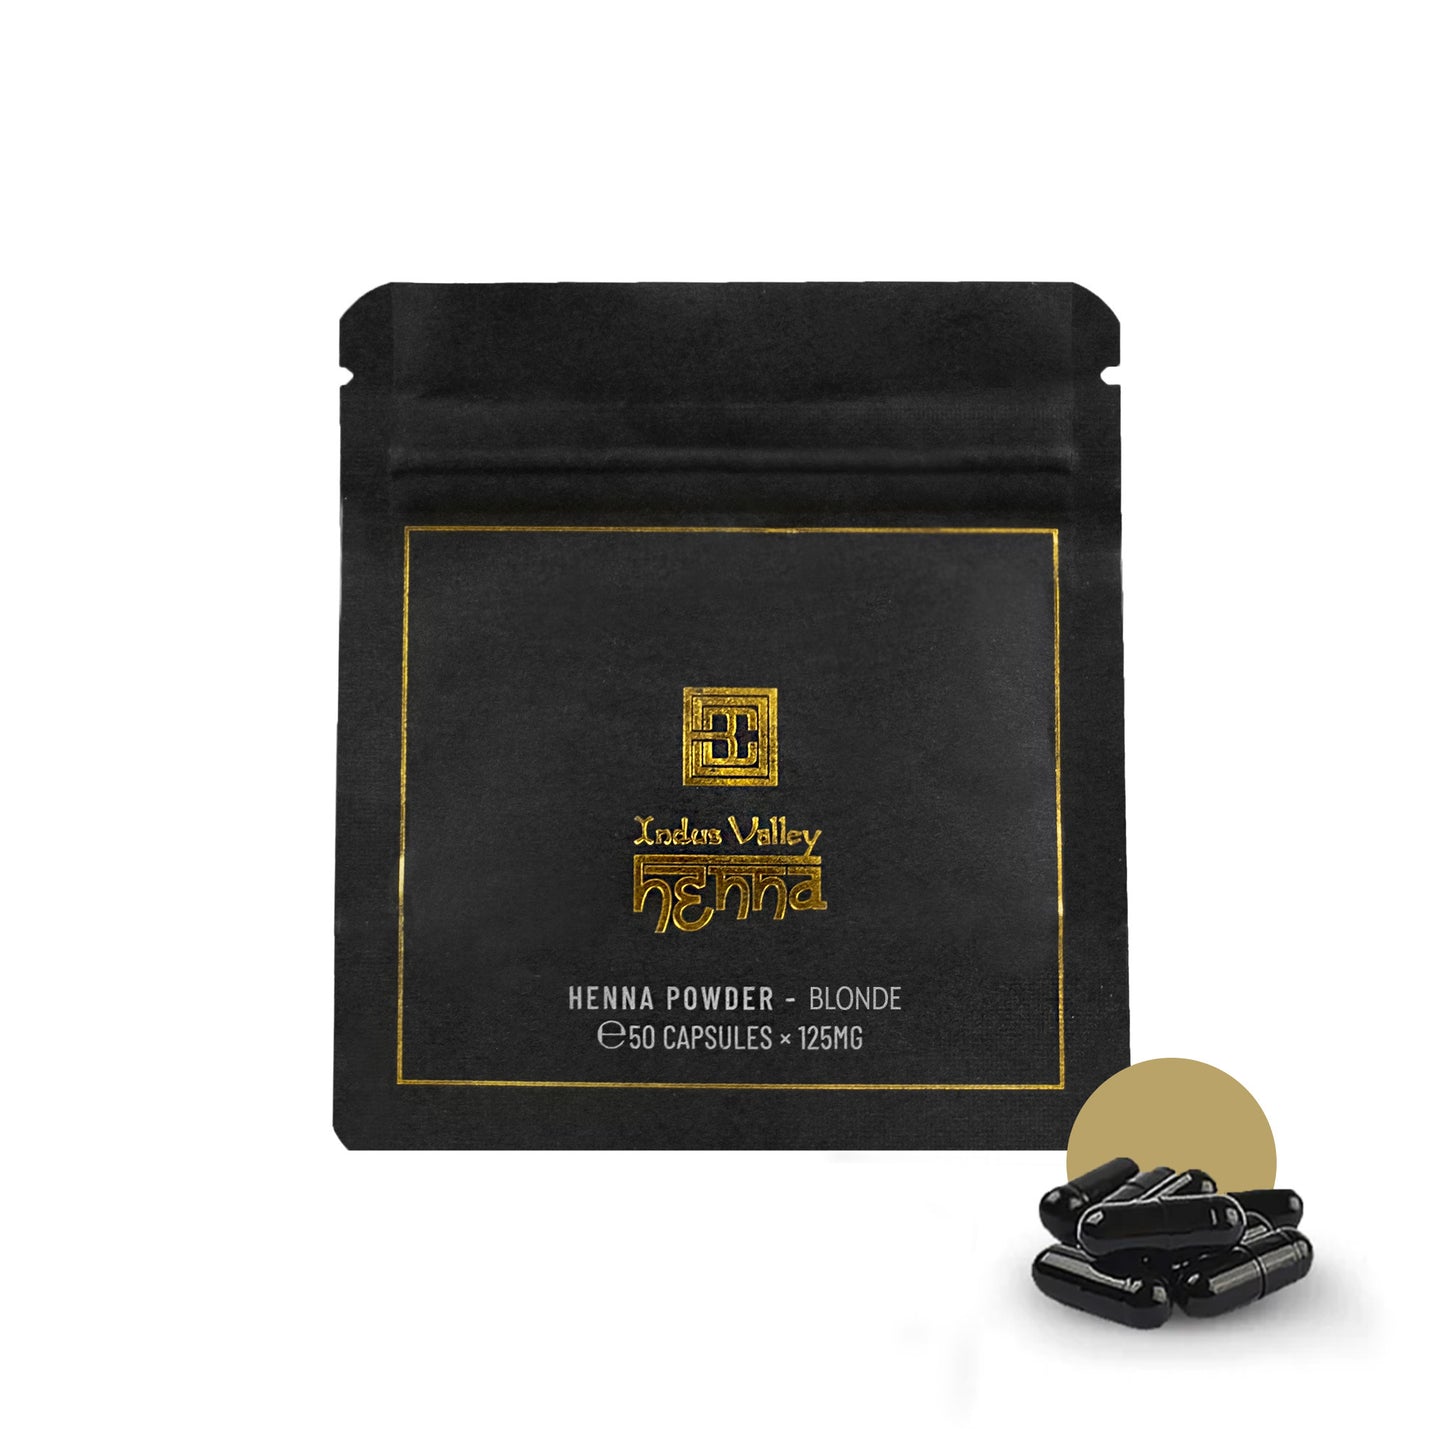 Brow Henna Powder capsules Color-Blonde alongside packaging against a white background